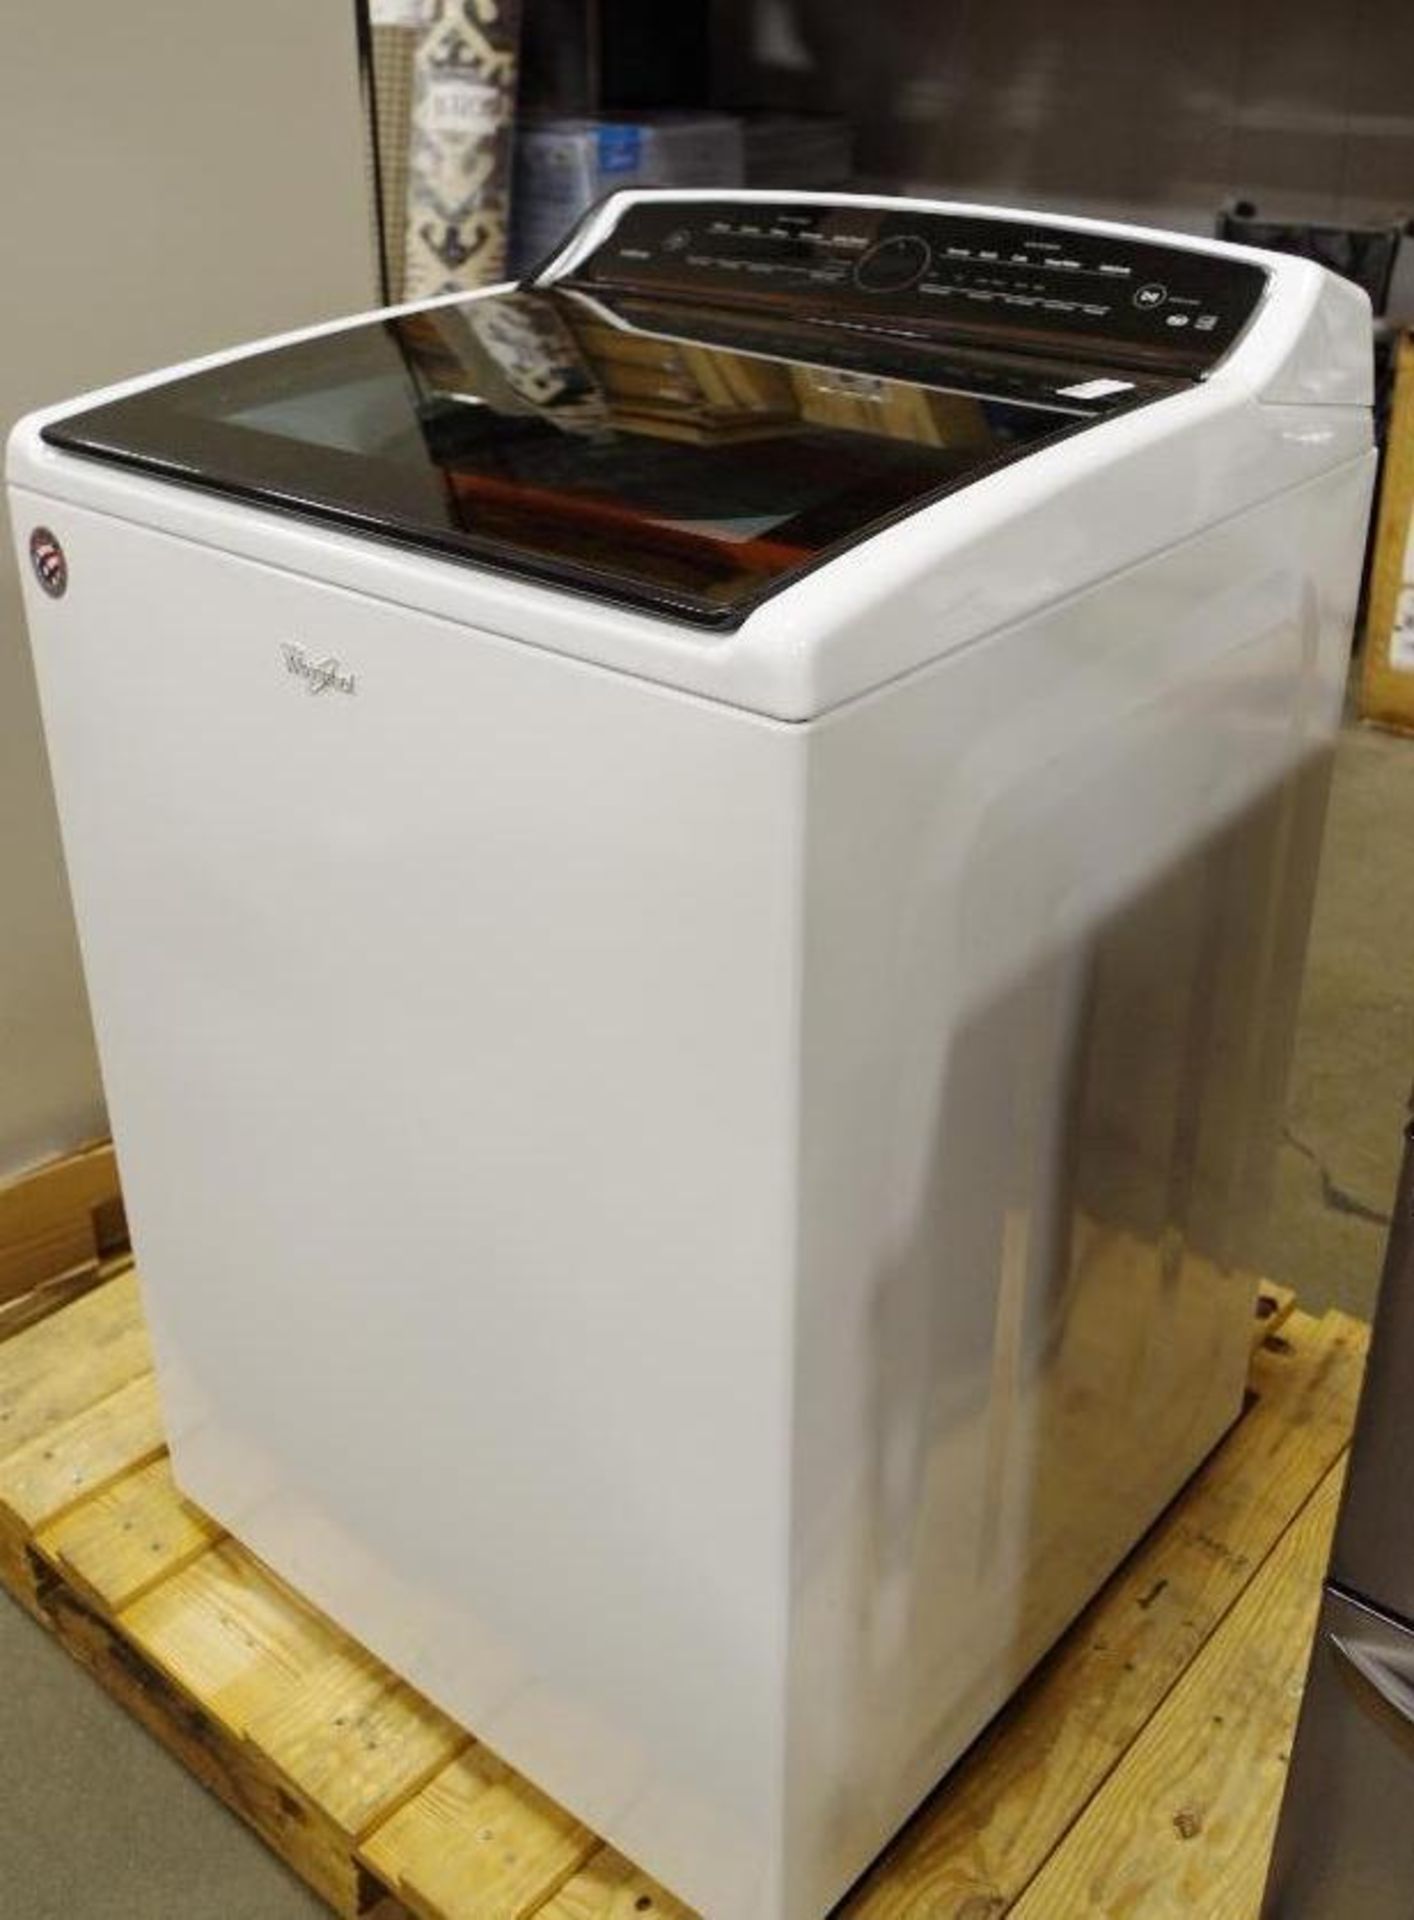 WHIRLPOOL Top Load Washer M/N WTW8000DW3 (Must inspect to assess condition)